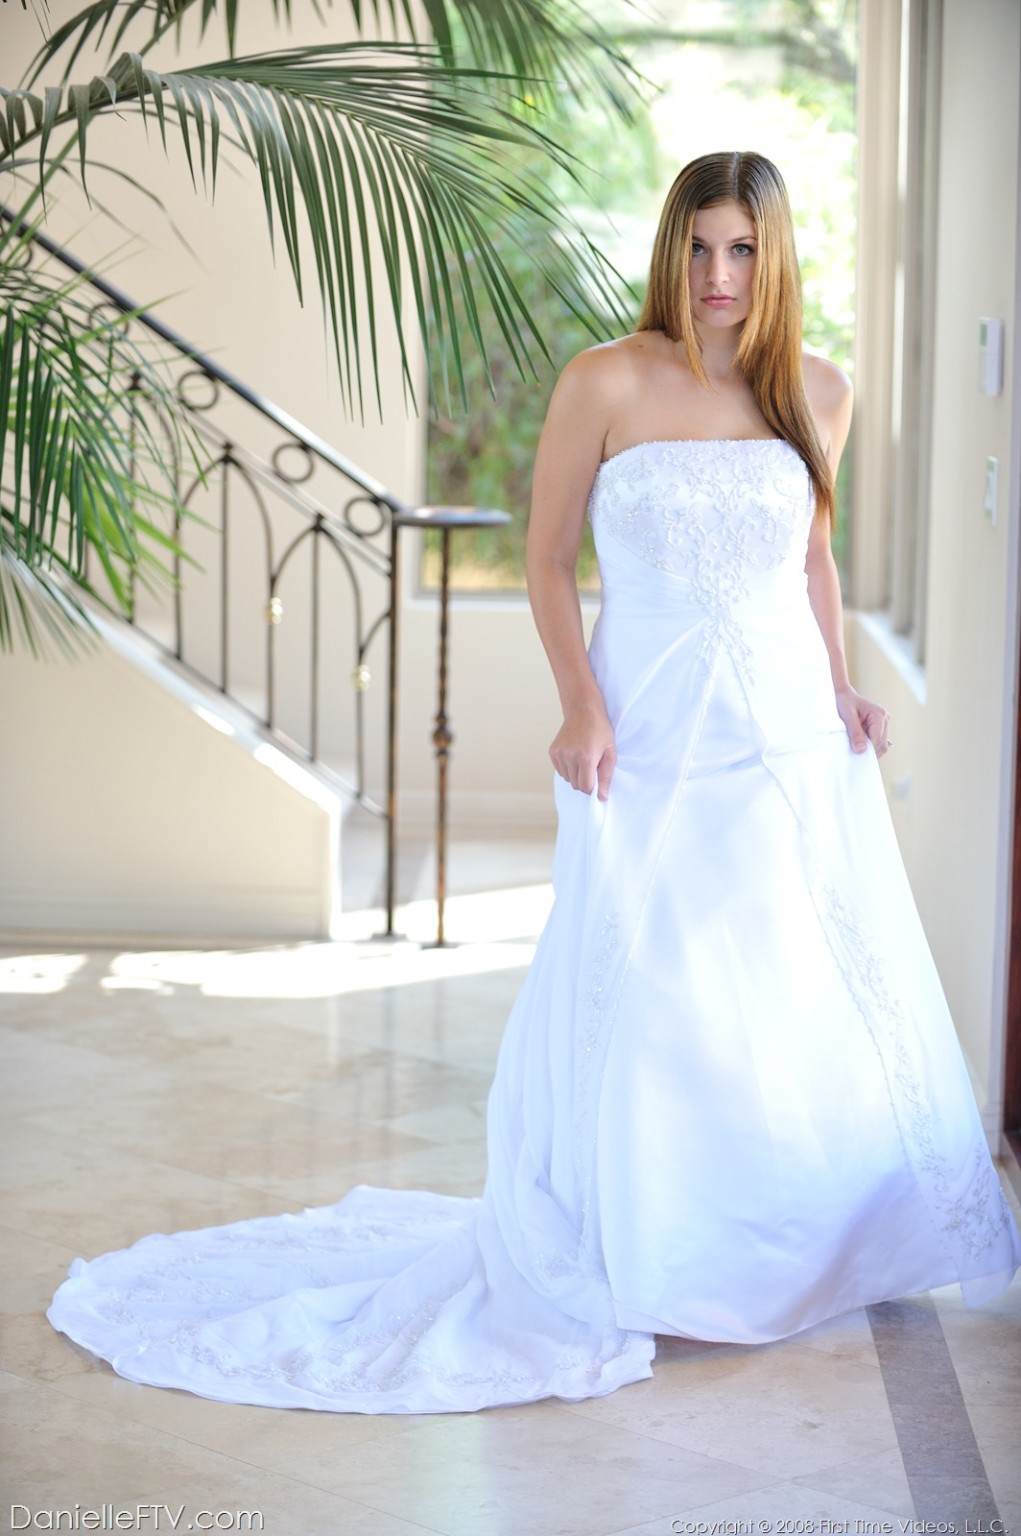 Danielle poses in a long white gown #68501363